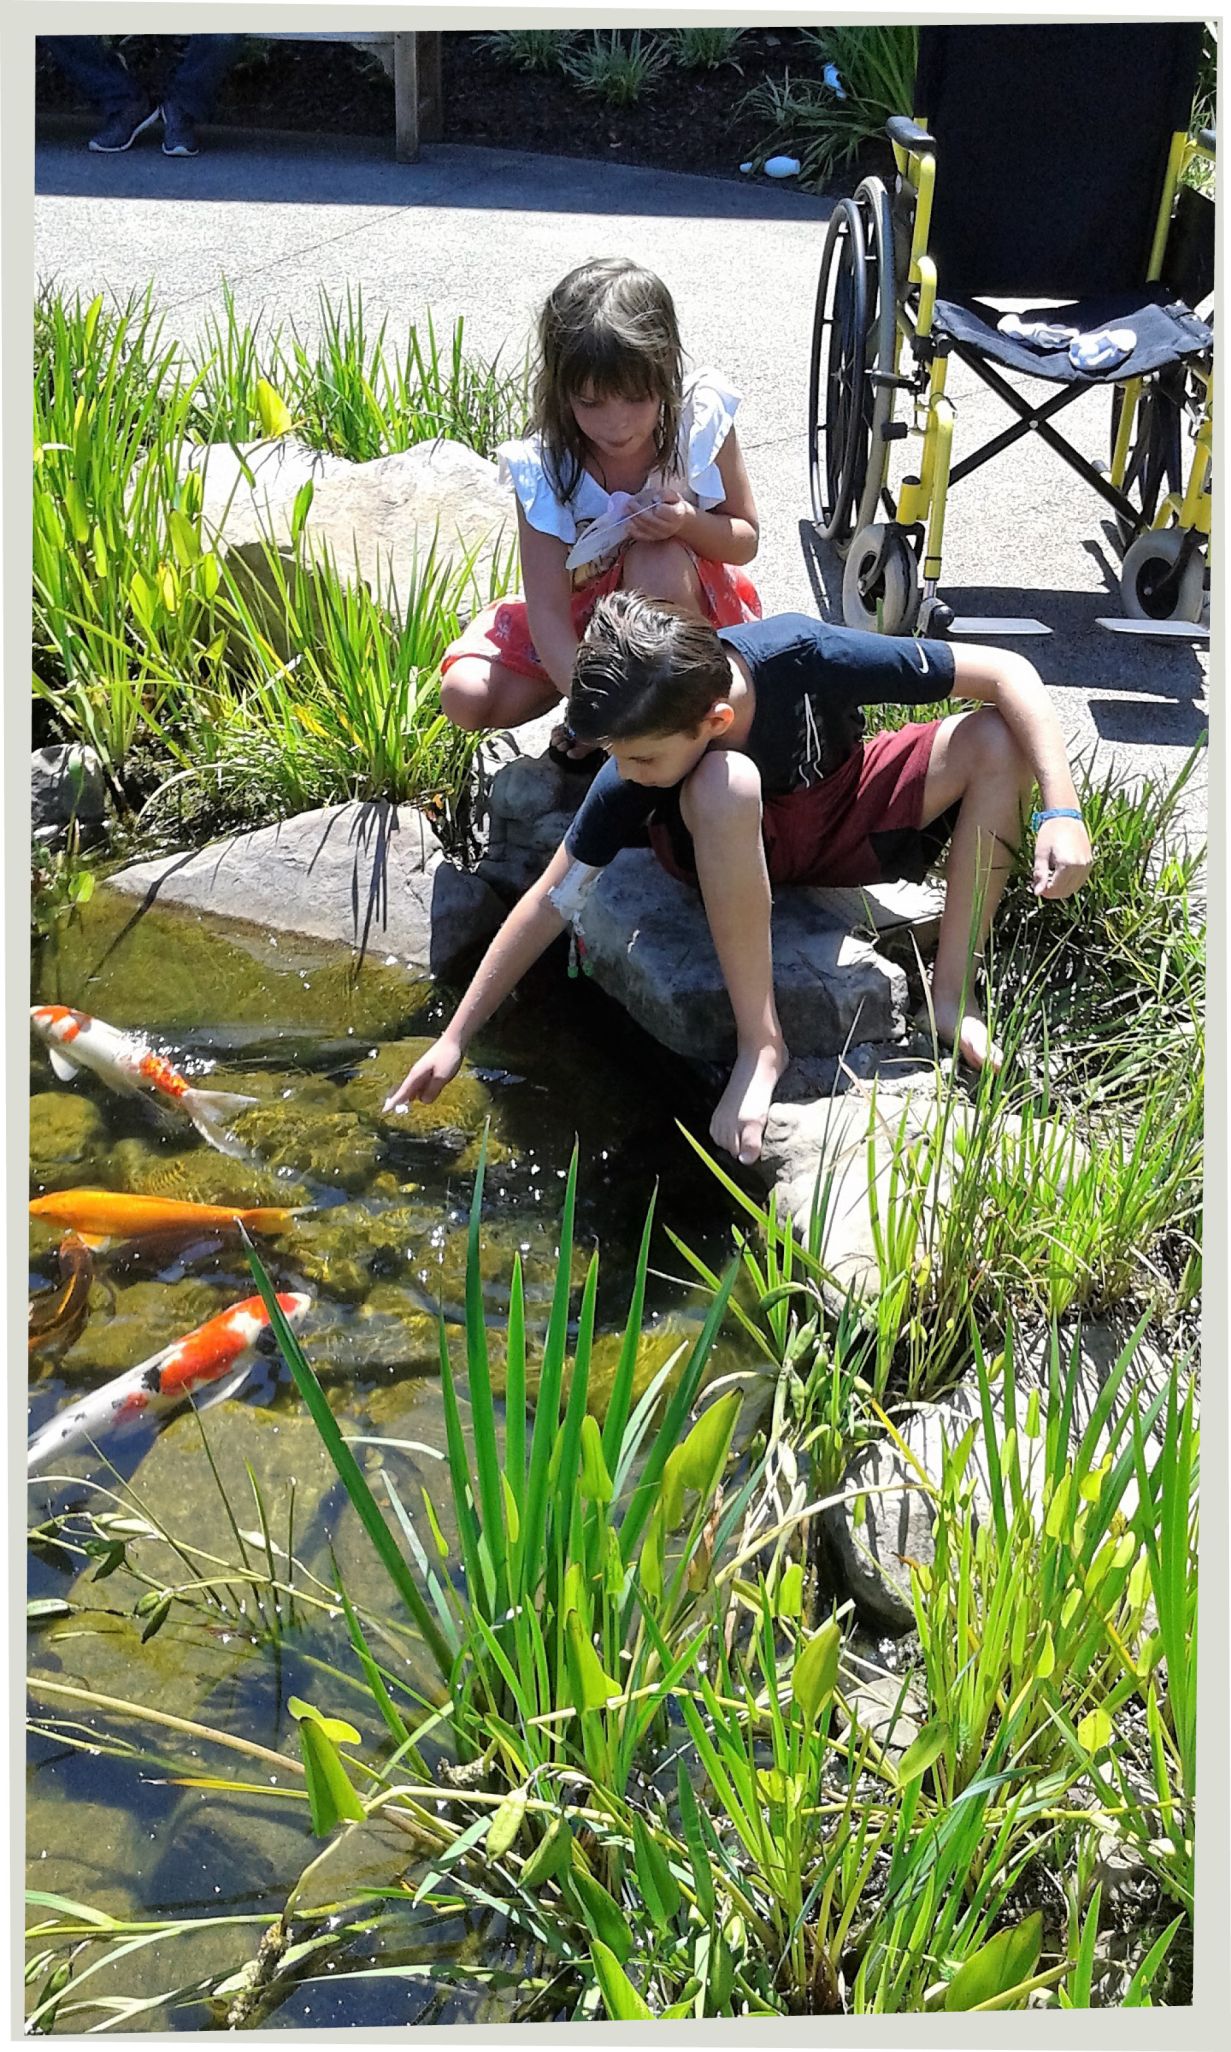 Brayden sits on a rock in front of his wheelchair feeding the fish at a hospital garden koi pond with his sister, Jessica, nearby.